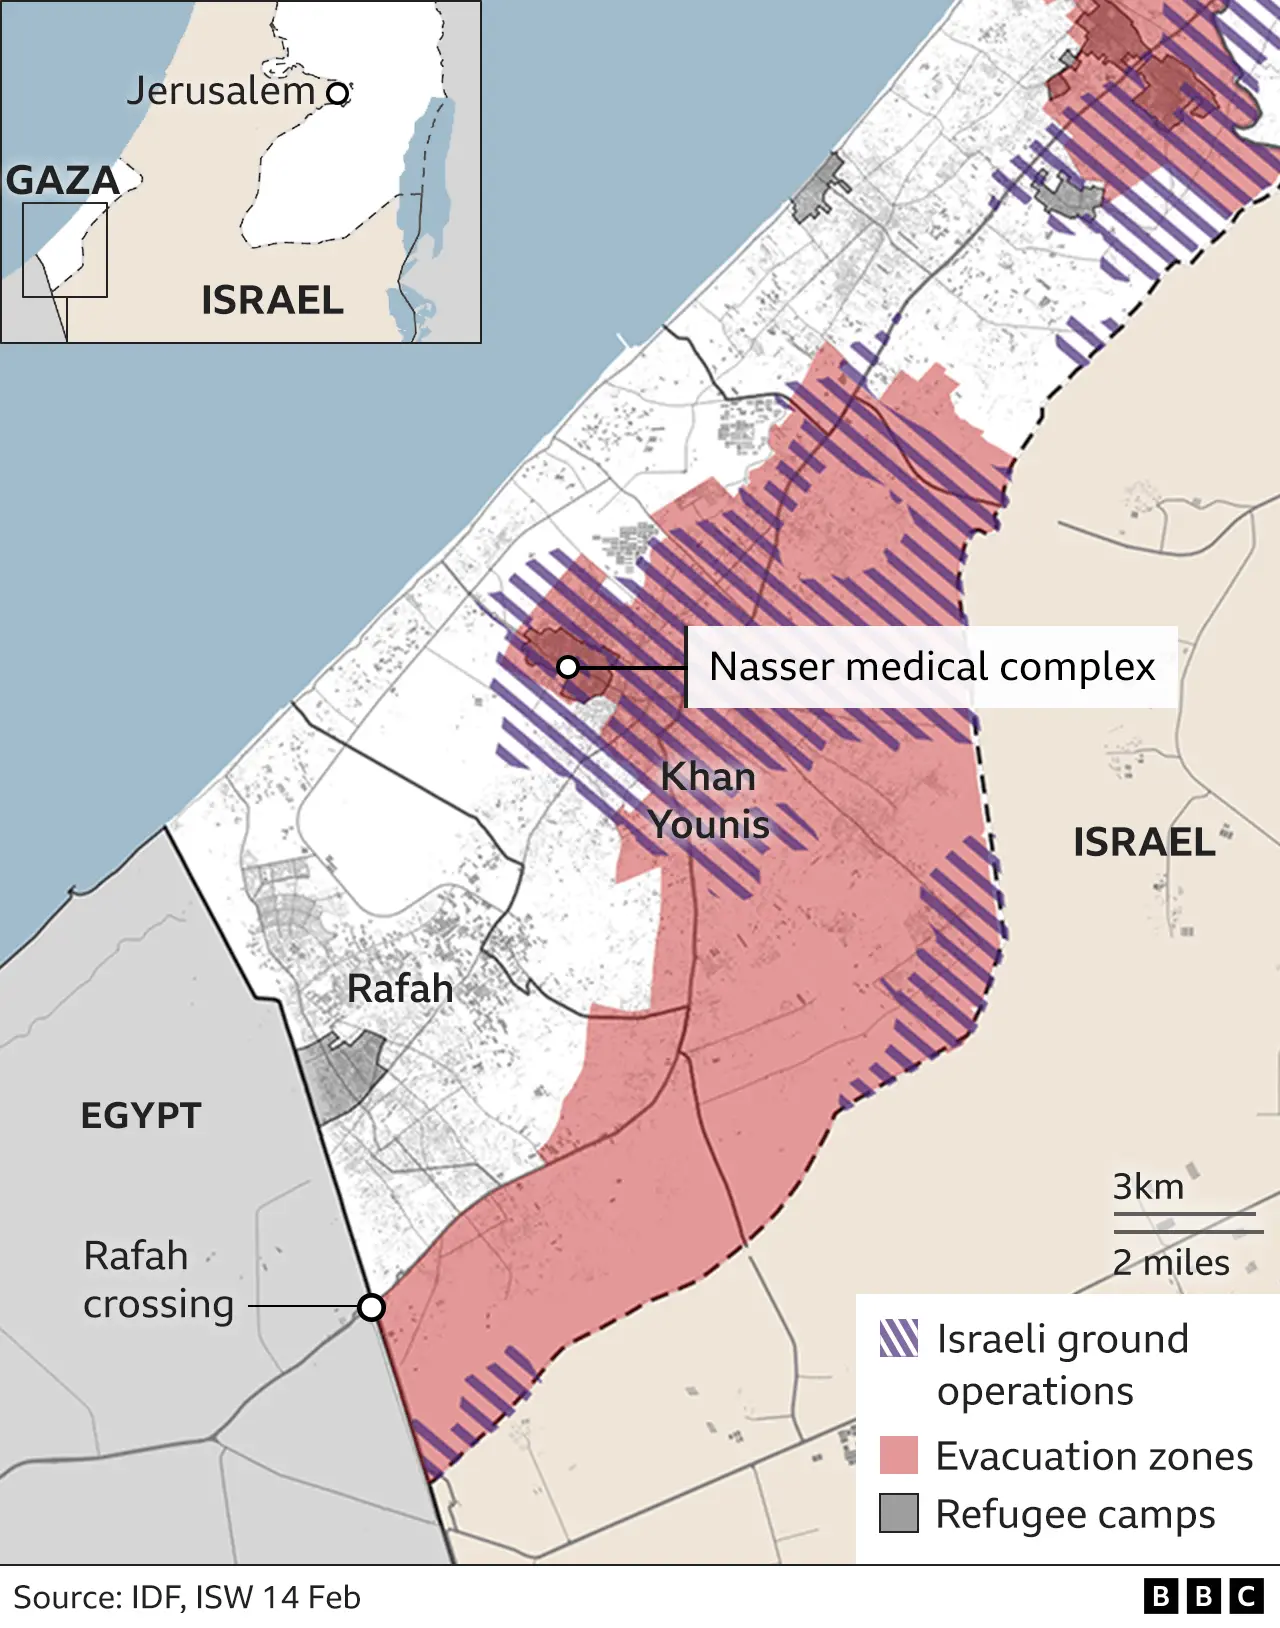 Map of southern Gaza showing the location of the Nasser medical complex in Khan Younis, plus the Israeli declared evacuation areas and the extent of Israeli ground operations as of 14 February 2023.